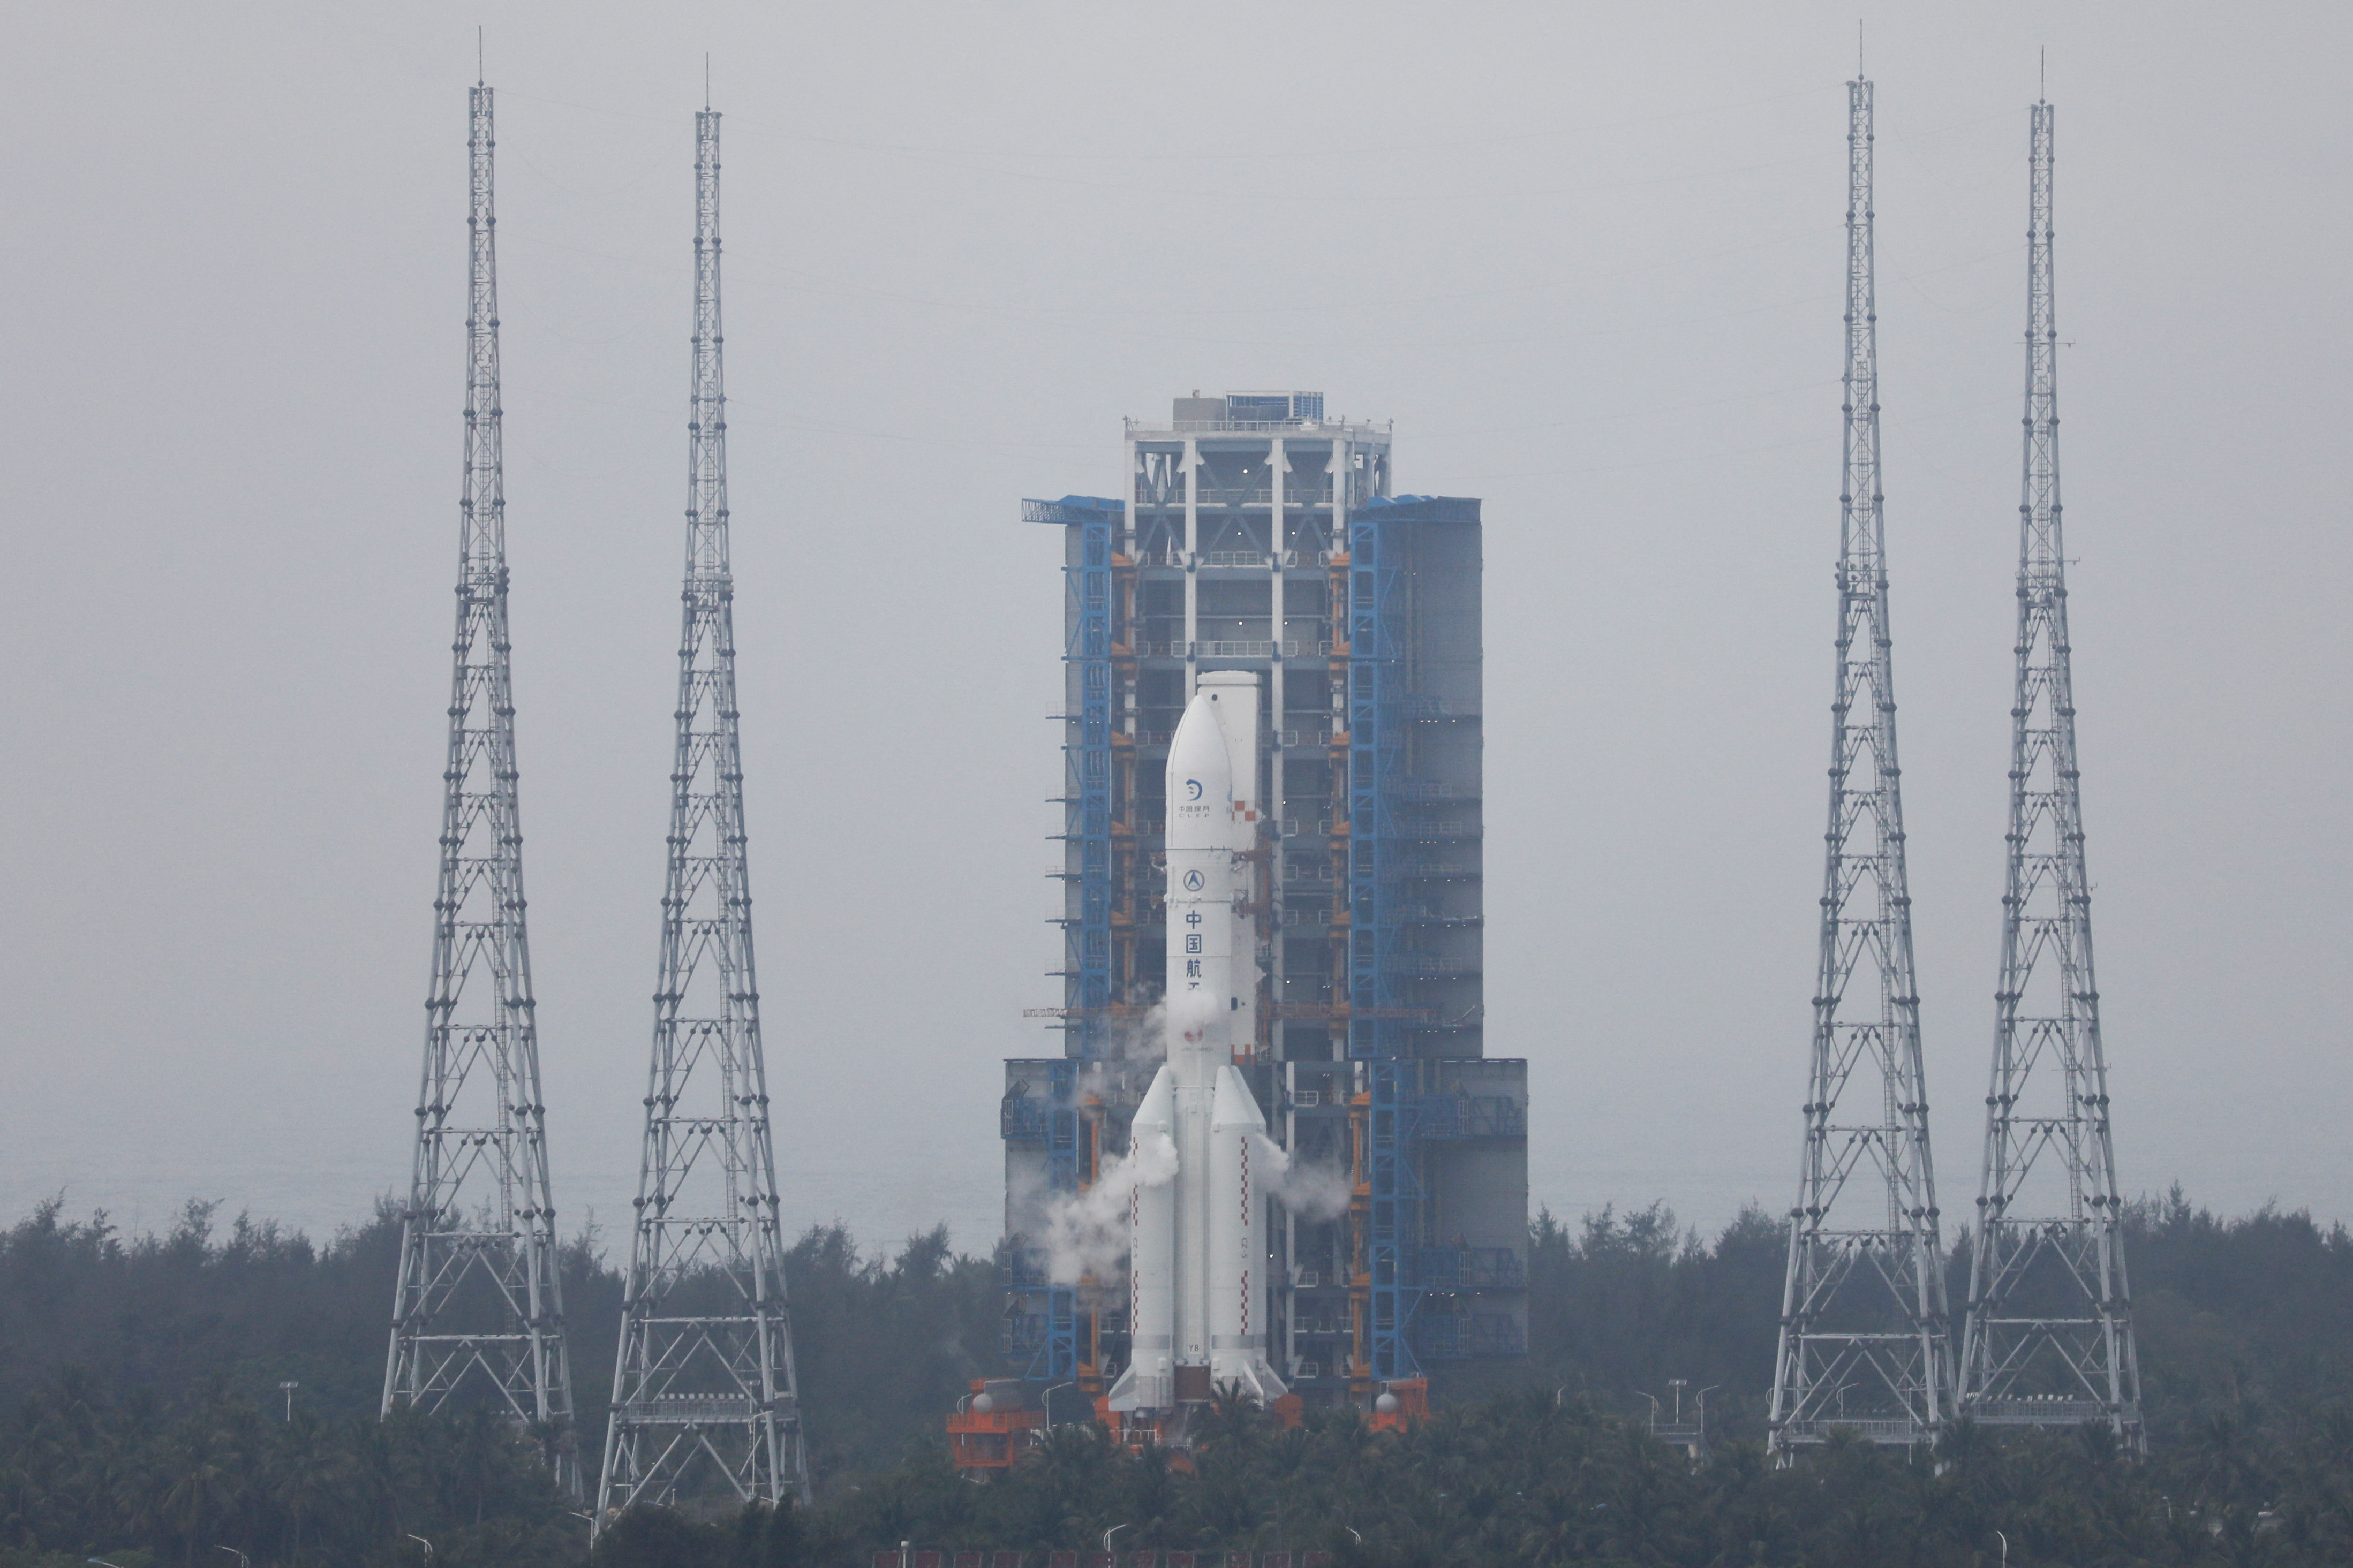 The Chang'e 6 lunar probe and the Long March-5 Y8 carrier rocket combination sit atop the launch pad at the Wenchang Space Launch Site in Hainan province